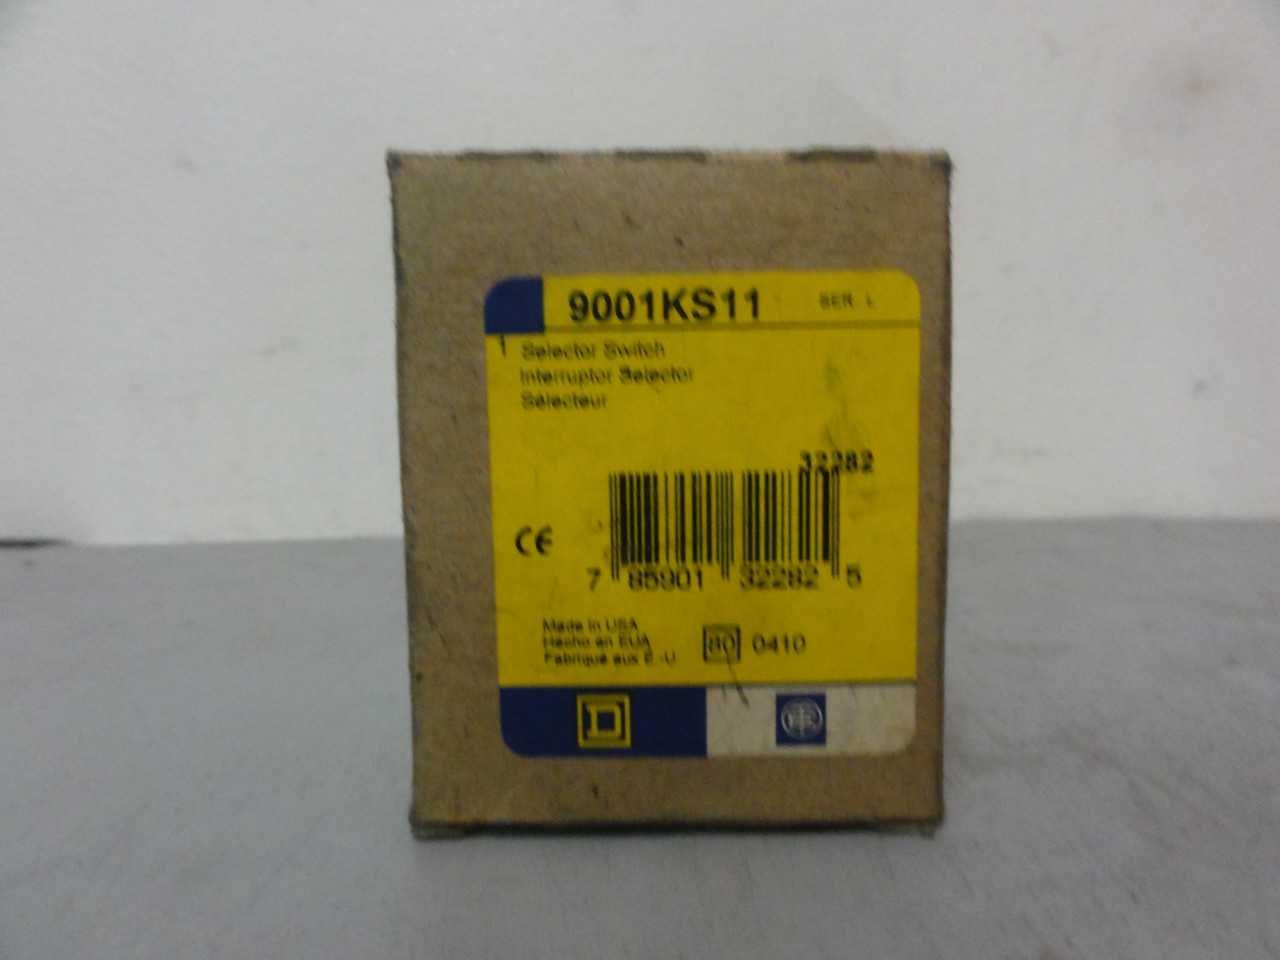 Square D 9001KS11 Series L Selector Switch (Lot of 3) Brand New (Open Box)